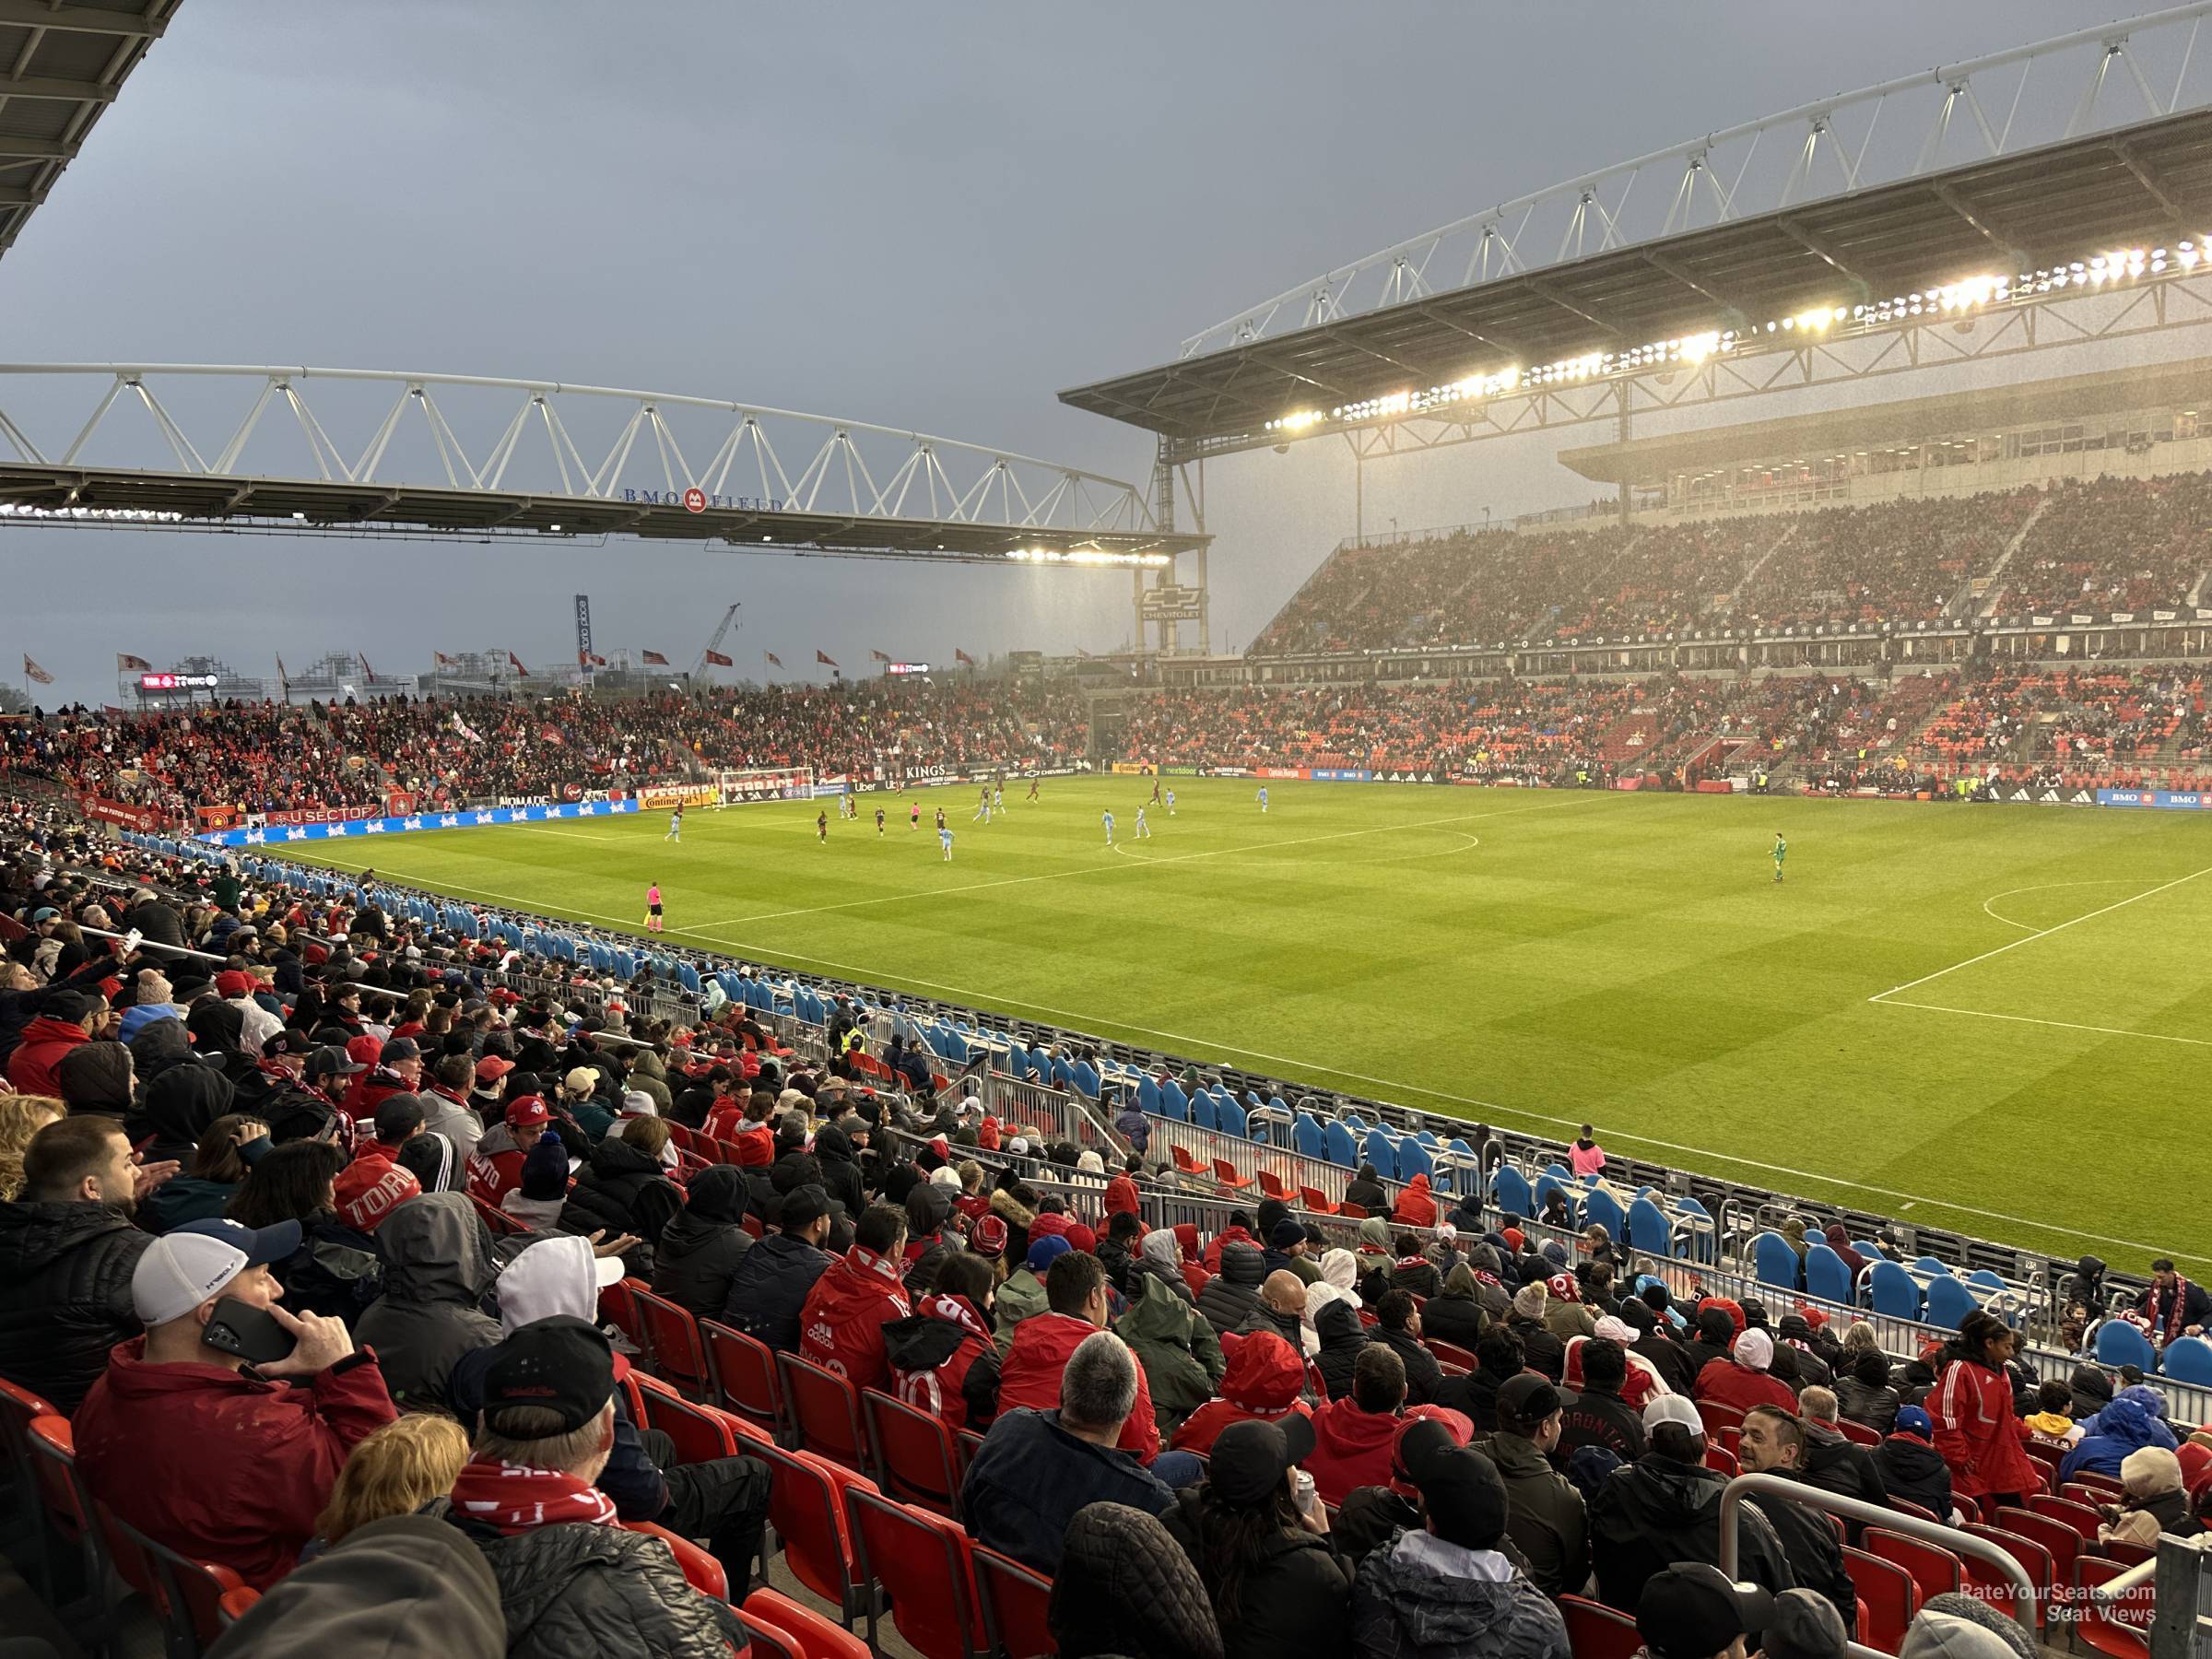 section 105, row 20 seat view  - bmo field